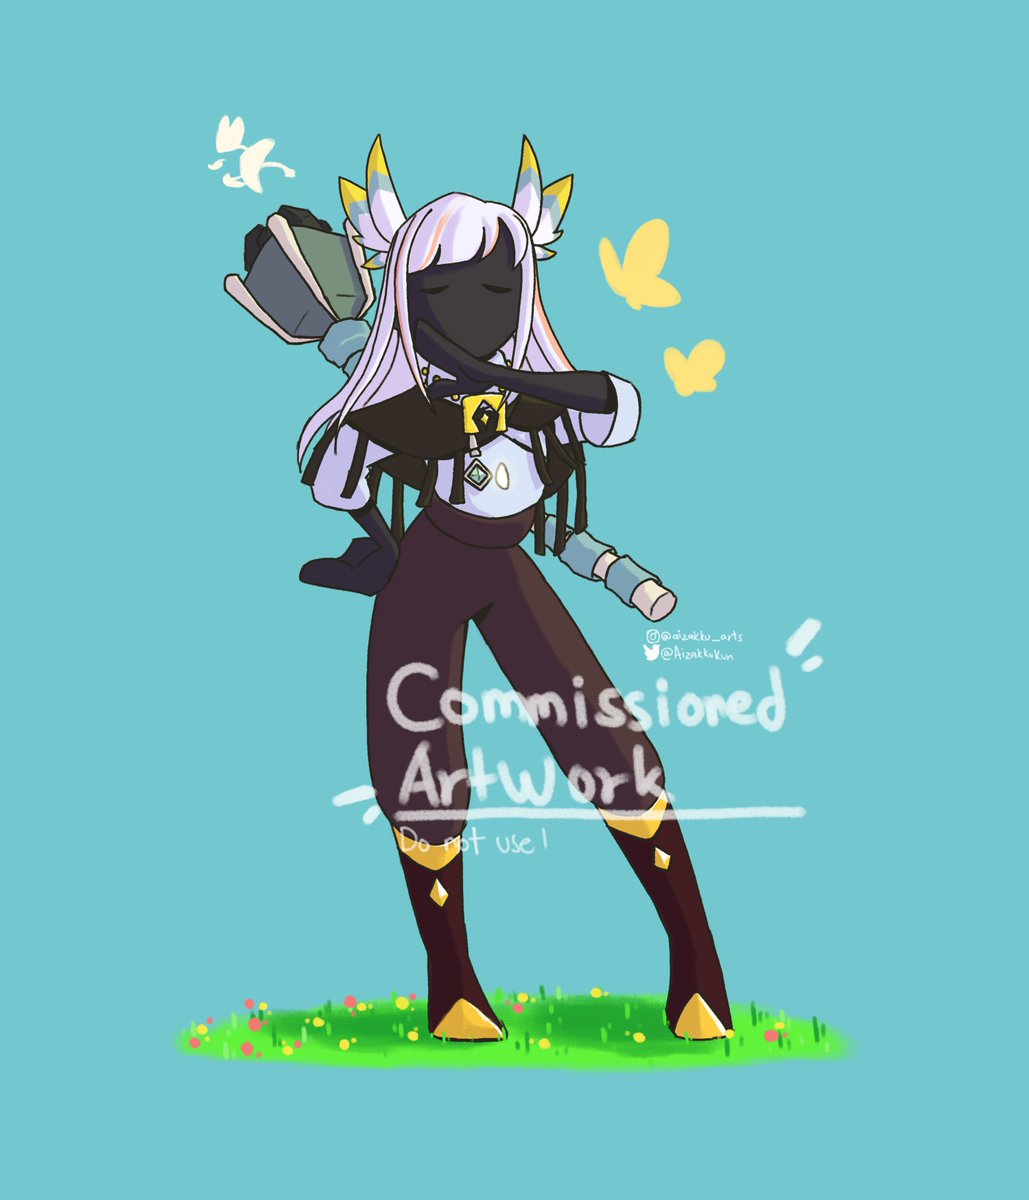 Commissioned by @hyukxjae thanks for being my first client! i'm glad you entrusted me with this artwork 
#art #artist #commissionsopen #commissions #commissionedartwork #digitalart #thatskygame #MediBang